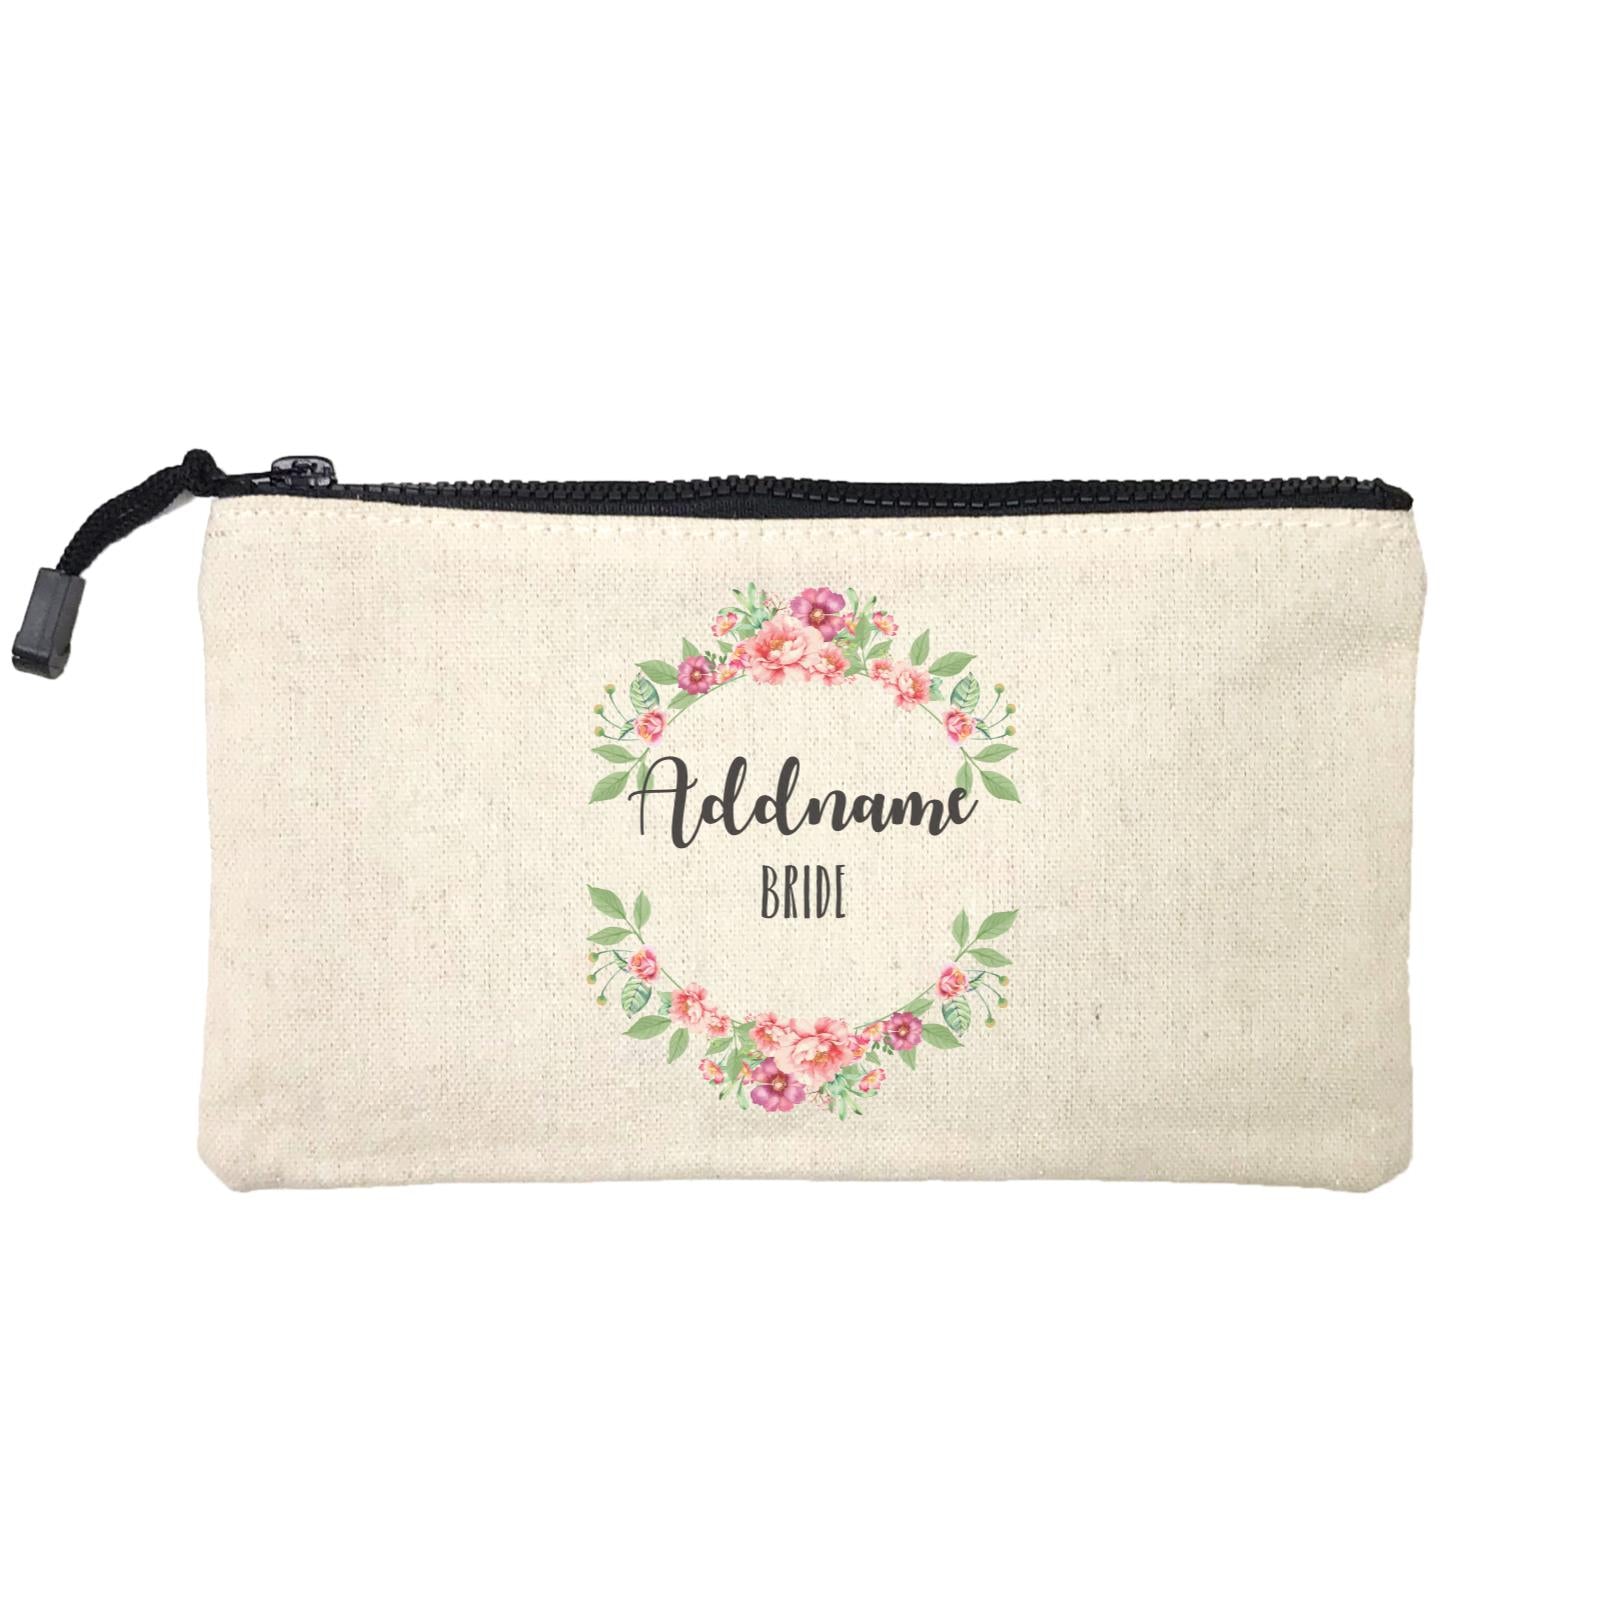 Bridesmaid Floral Sweet Coral Flower Wreath Bride Addname Mini Accessories Stationery Pouch